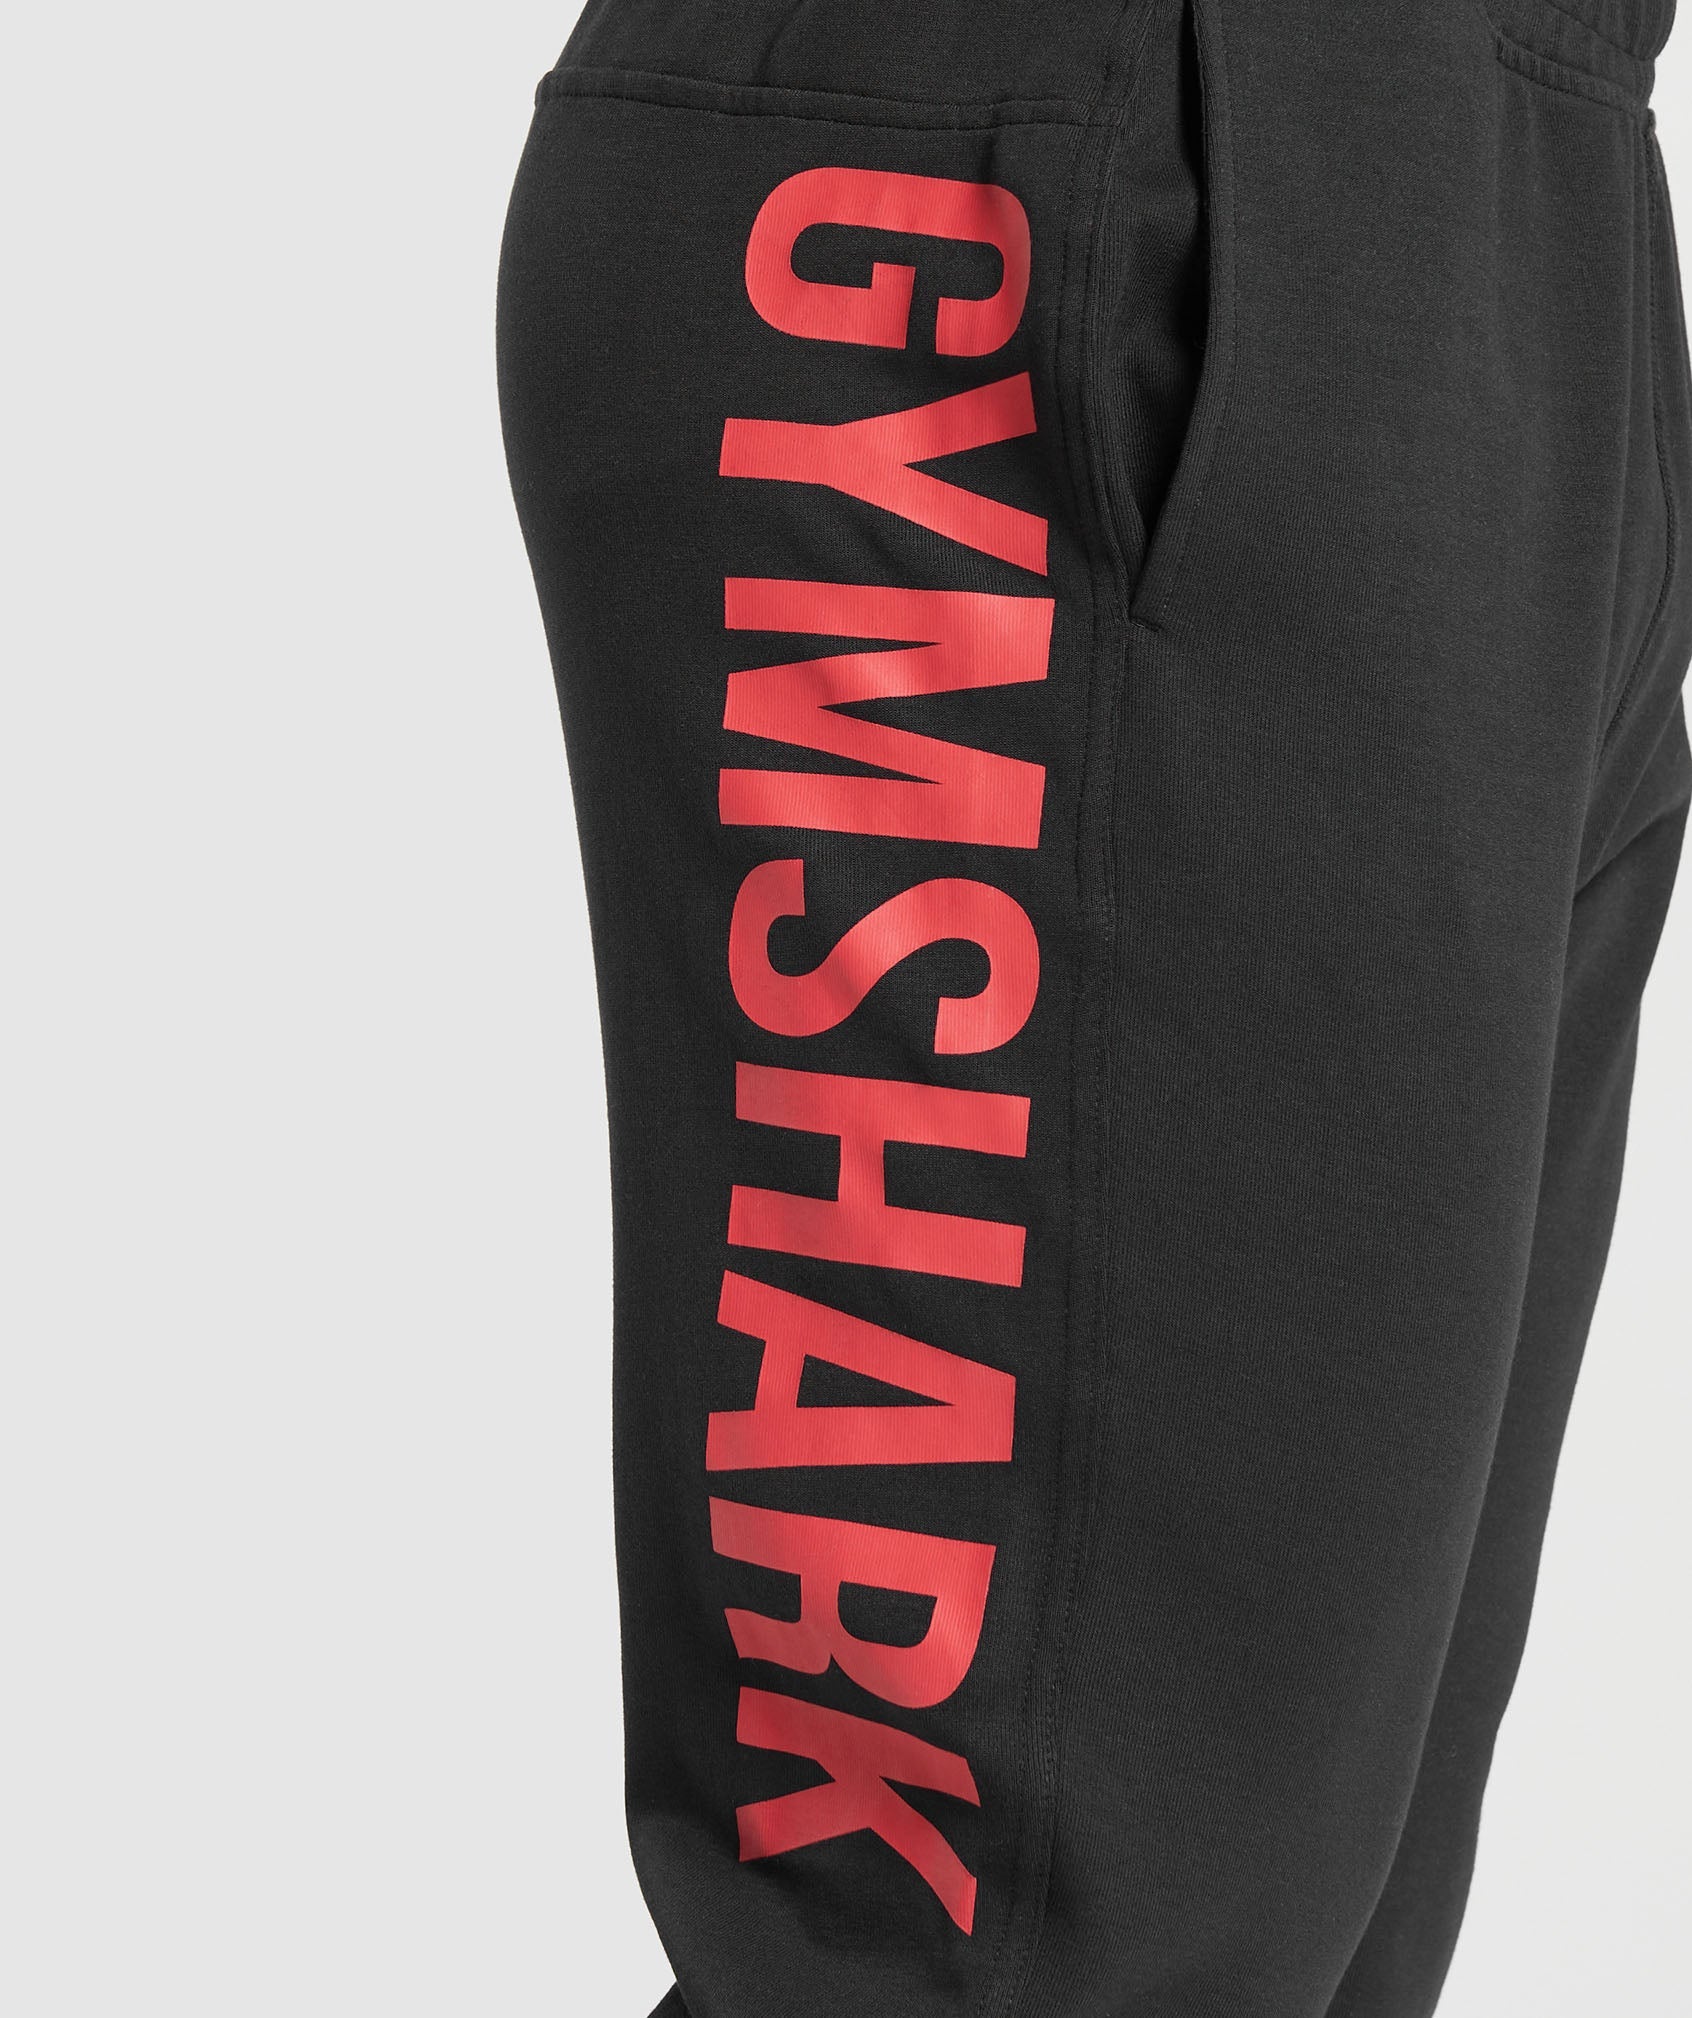 Impact Joggers in Black/Vivid Red - view 6